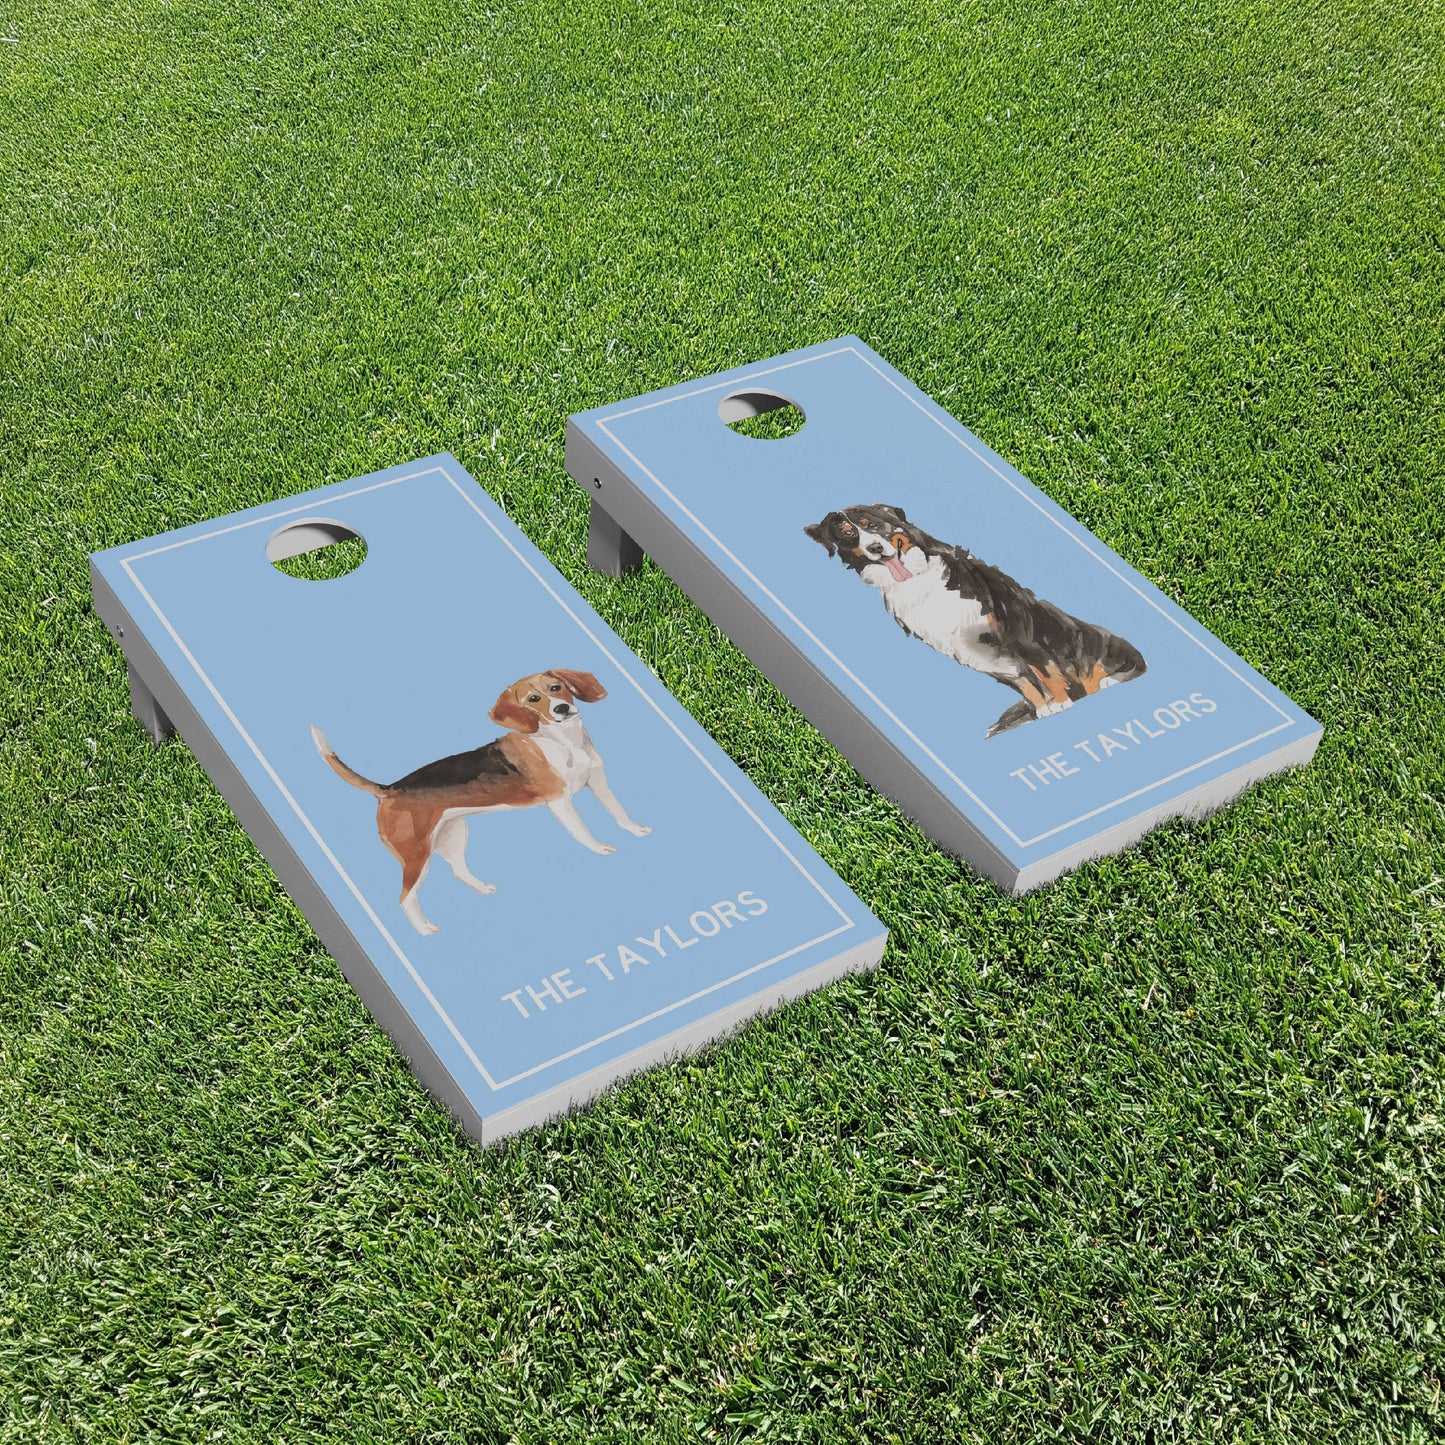 Luxury Personalized Dog Friends Cornhole Boards - A Perfect Gift For The Dog Lover, Many Breeds Available!